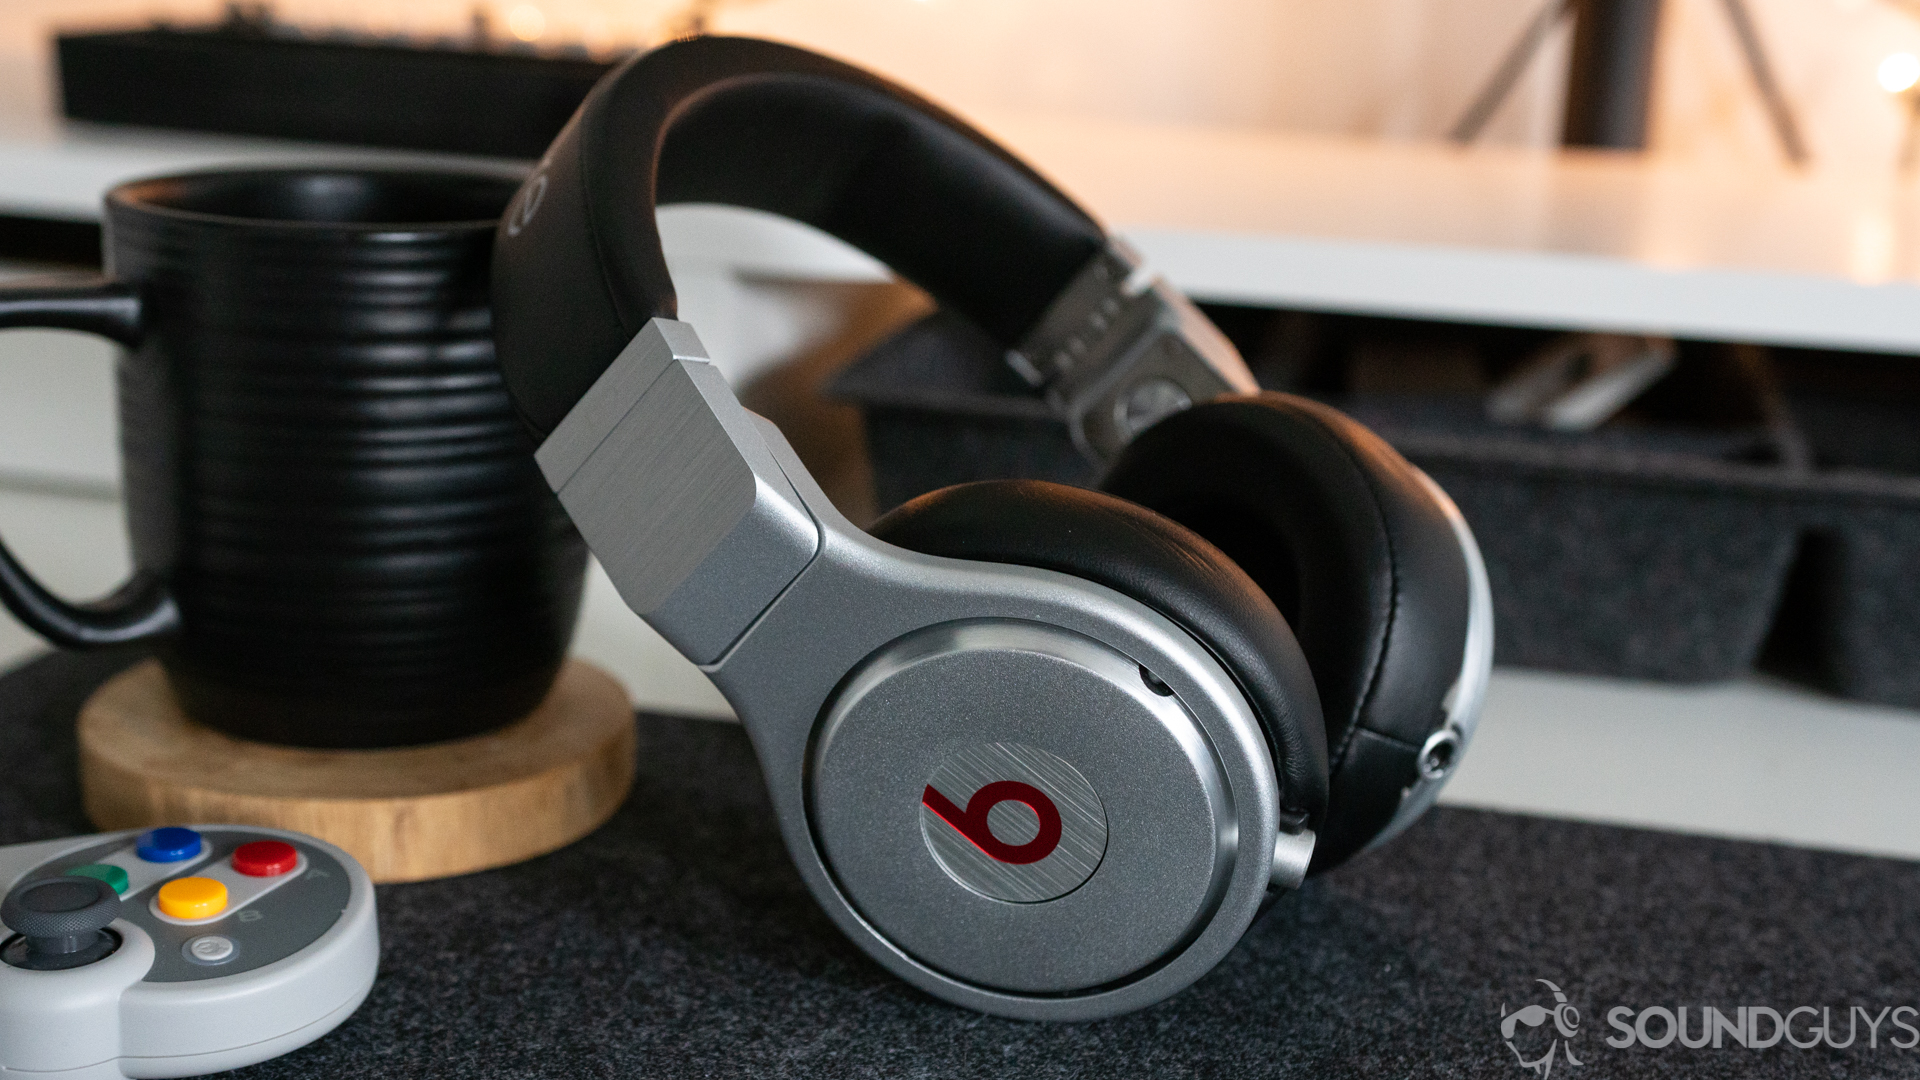 Shot of the Beats Pro on a desk.